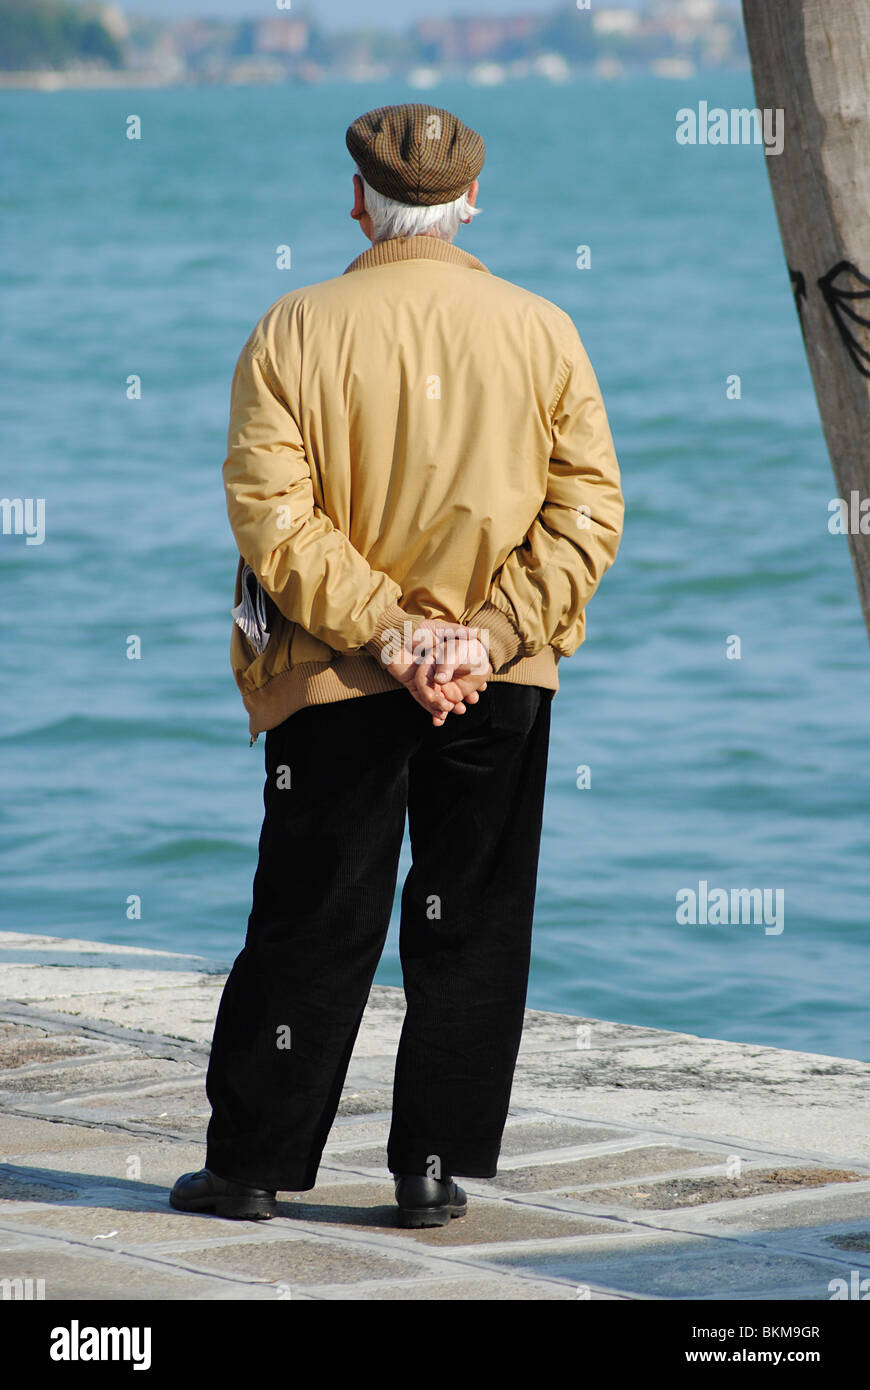 Old Italian man looking out to sea, Venice, Italy Stock Photo